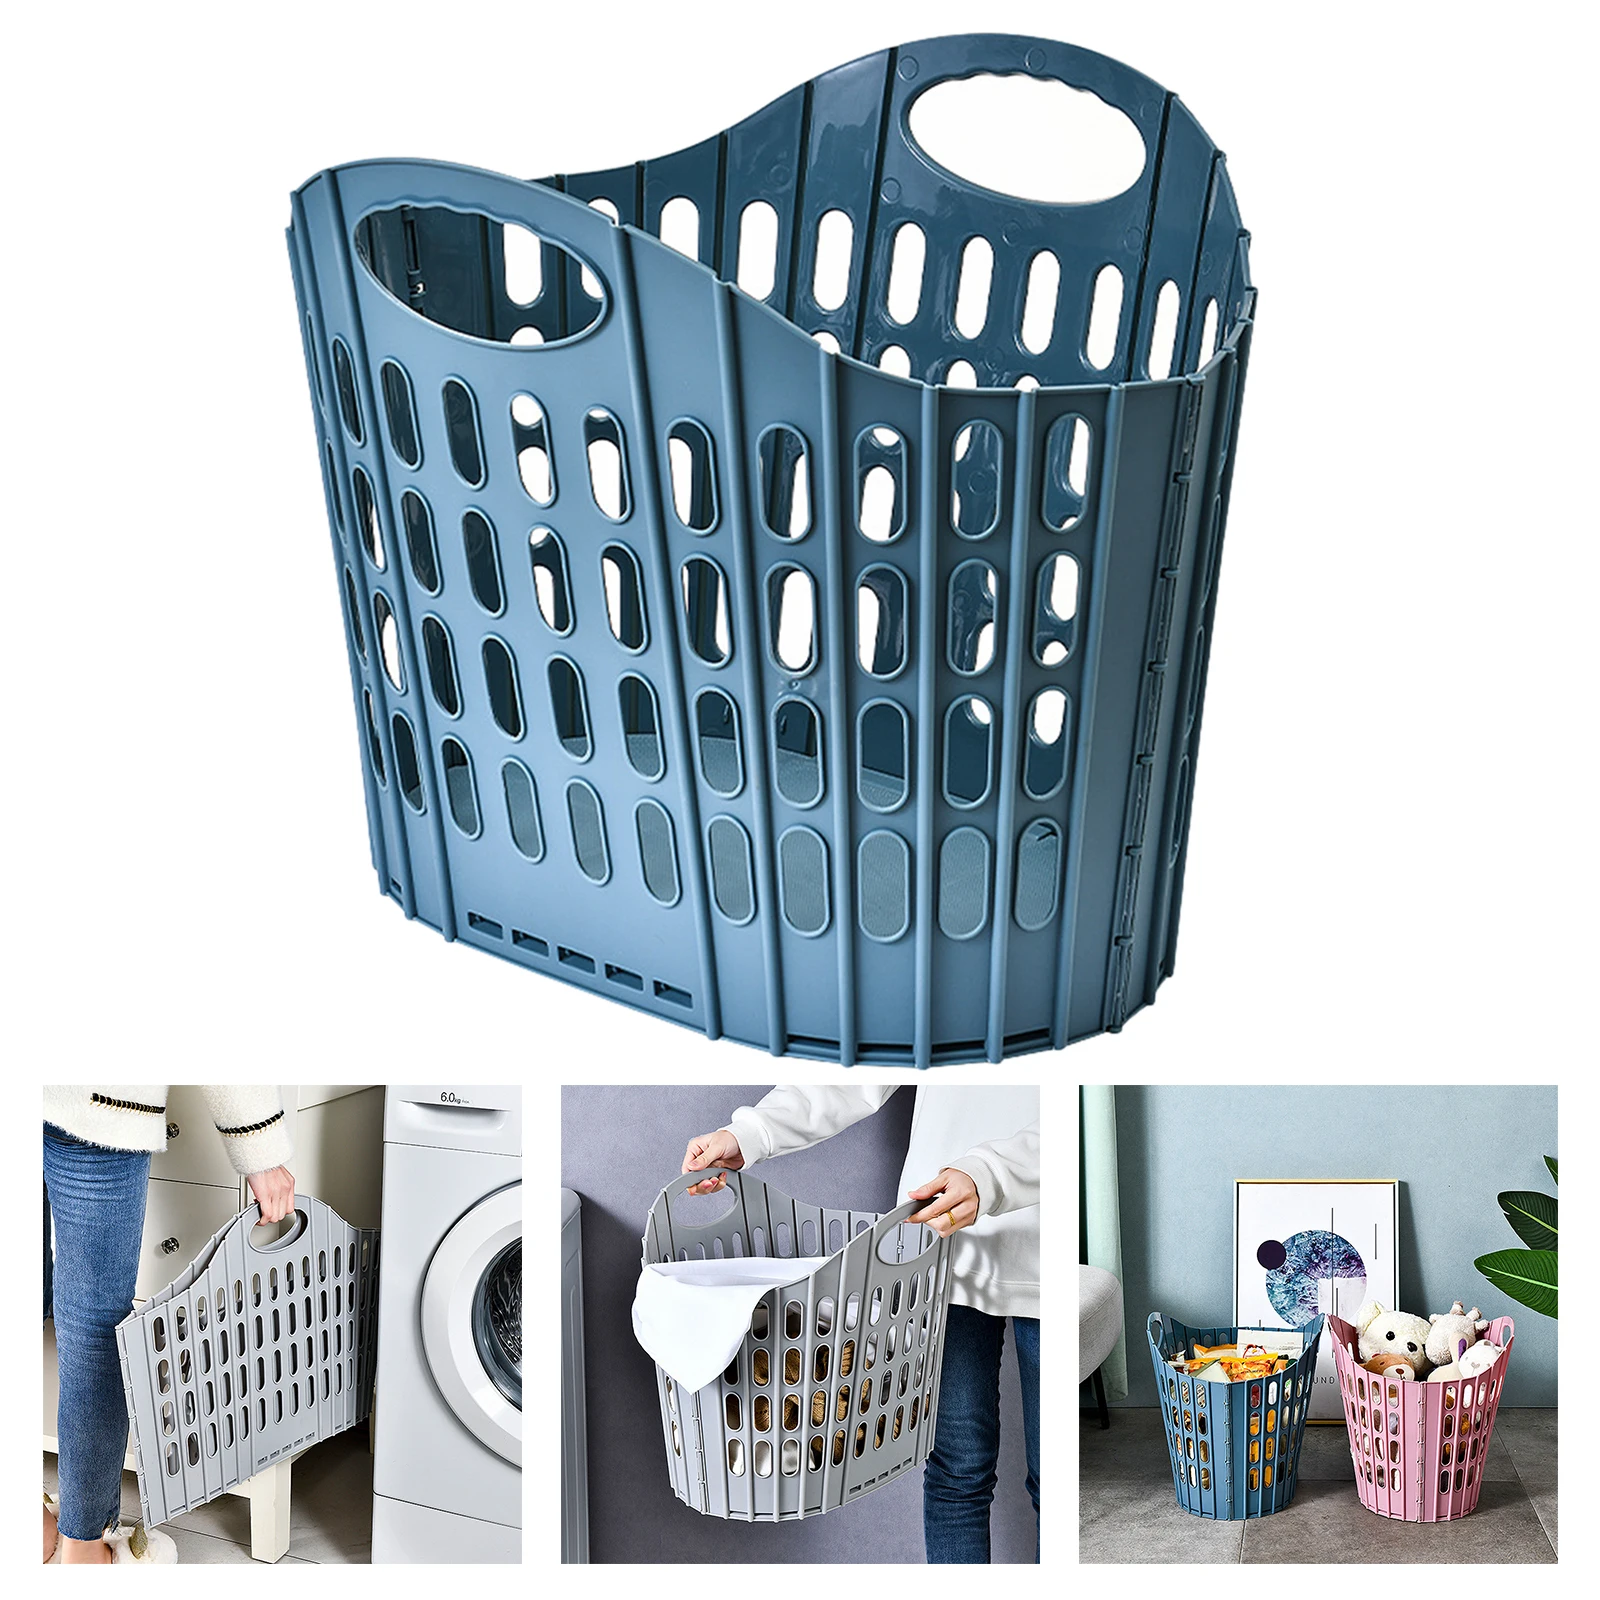 Souarts Collapsible Laundry Baskets Collapsible Laundry Basket for Bedroom Large Oxford Storage Basket with Handles for Bedroom Bathroom 34x45 cm 